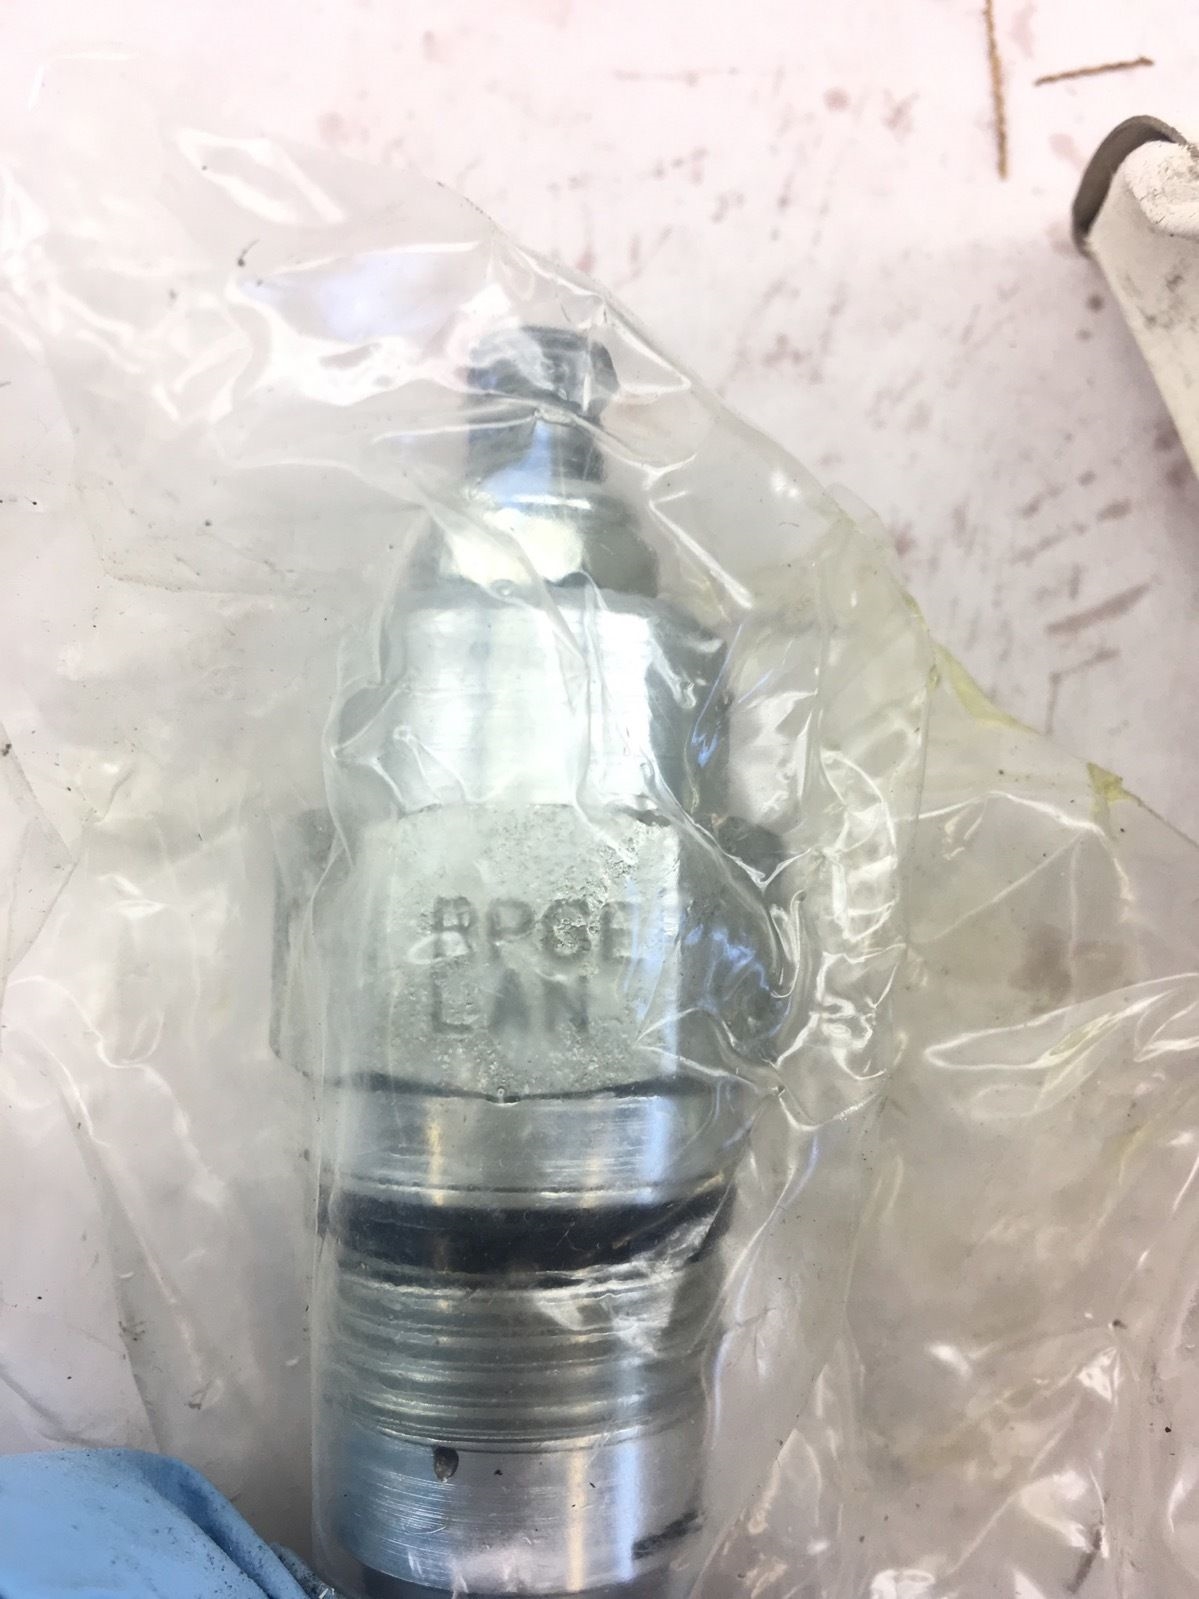 NEW IN BOX SUN HYDRAULICS RPGE-LAN PISTON RELIEF VALVE, FAST SHIPPING! (A84) 2